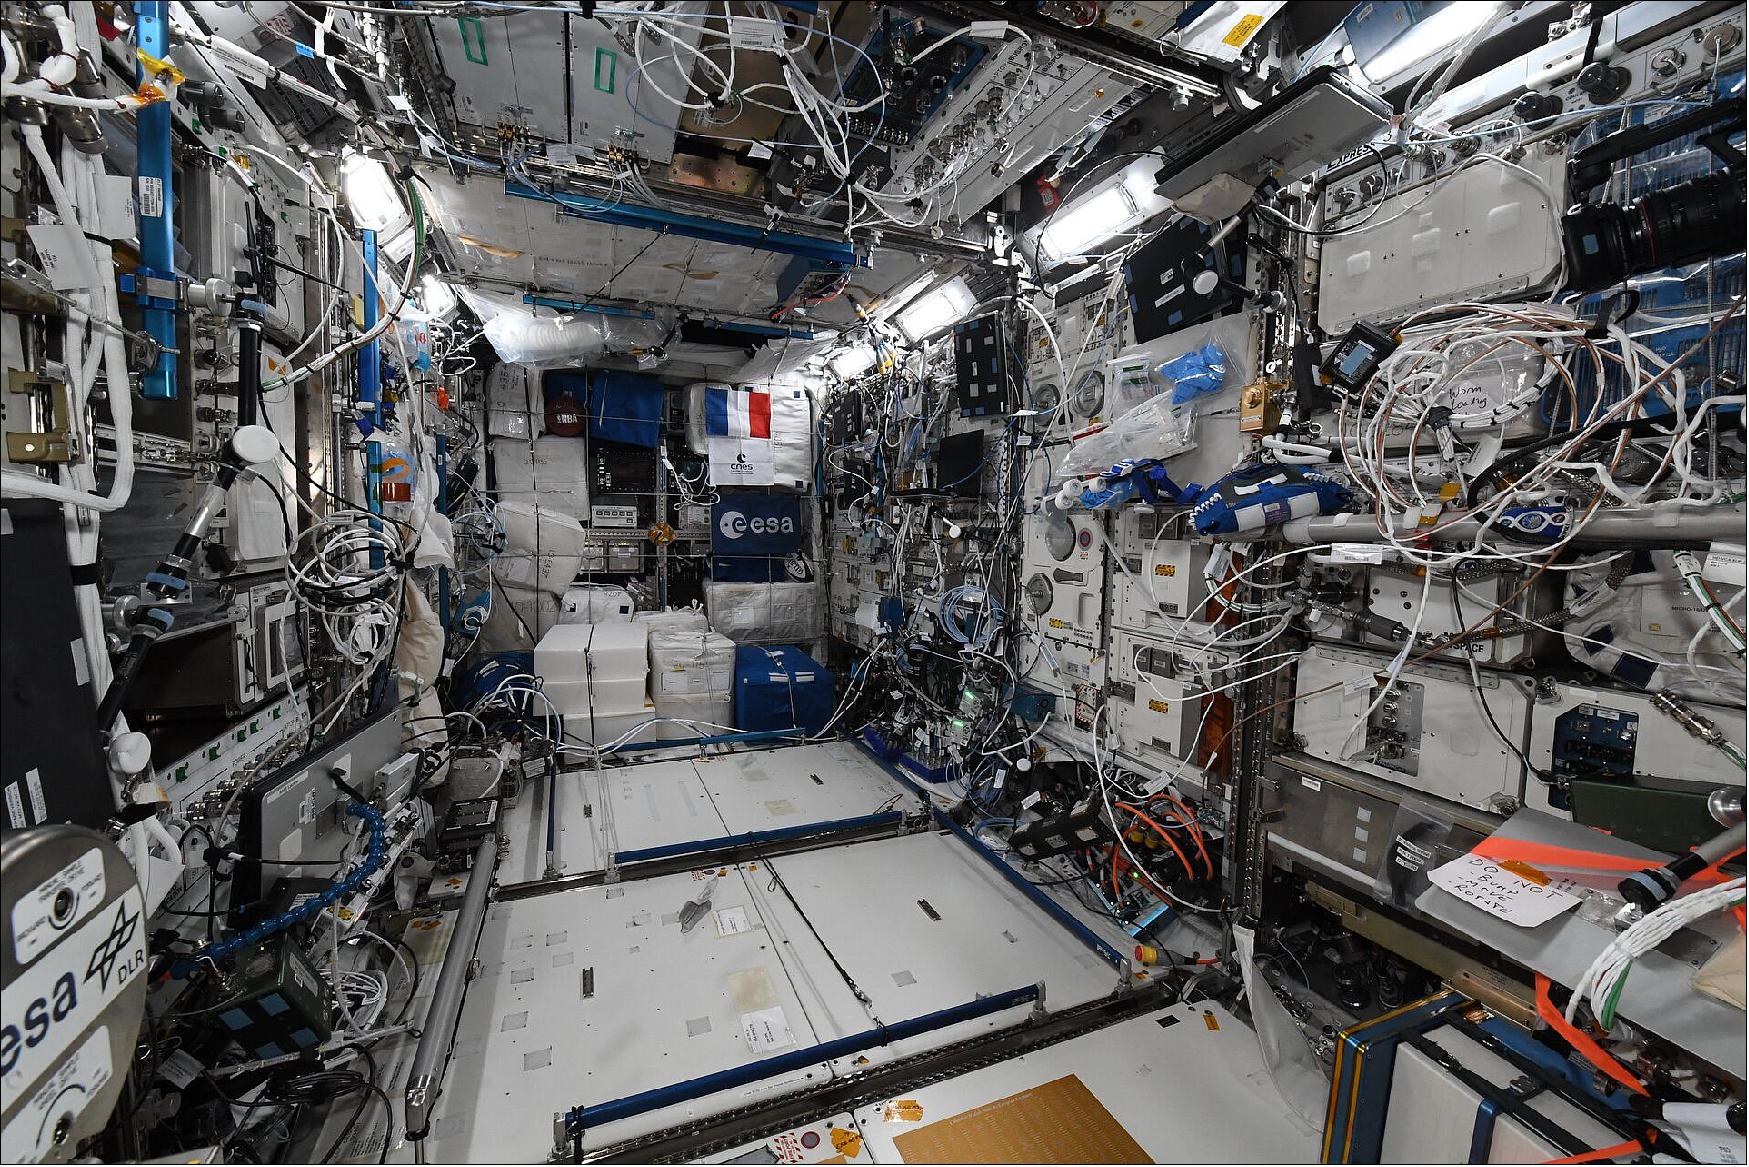 Figure 81: The Columbus laboratory is Europe's largest single contribution to the International Space Station. Permanently attached to the Harmony module, this pressurized laboratory allows researchers on the ground, aided by the Station's crew, to conduct a wide variety of research in a weightless environment. Experiments in space science, Earth observation and technology can also be conducted outside the module, thanks to four exterior mounting platforms that are exposed to the vacuum of space. During his Alpha mission, Thomas will continue this research and experimentation on the ISS supported by his crewmates and ground teams from ESA, the US space agency NASA, Russian space agency Roscosmos, the Canadian Space Agency and the Japanese space agency JAXA. This enduring international partnership is a key feature of the Space Station as nations work across cultures and borders, performing science, research and engineering that has led to breakthroughs in disease research, materials science, Earth observation, our understanding of Earth's origins and more. This work helps humankind explore even farther while enhancing life here on Earth – setting Europe in good stead for its journey forward, beyond low Earth orbit to the Moon (image credit: ESA/NASA)